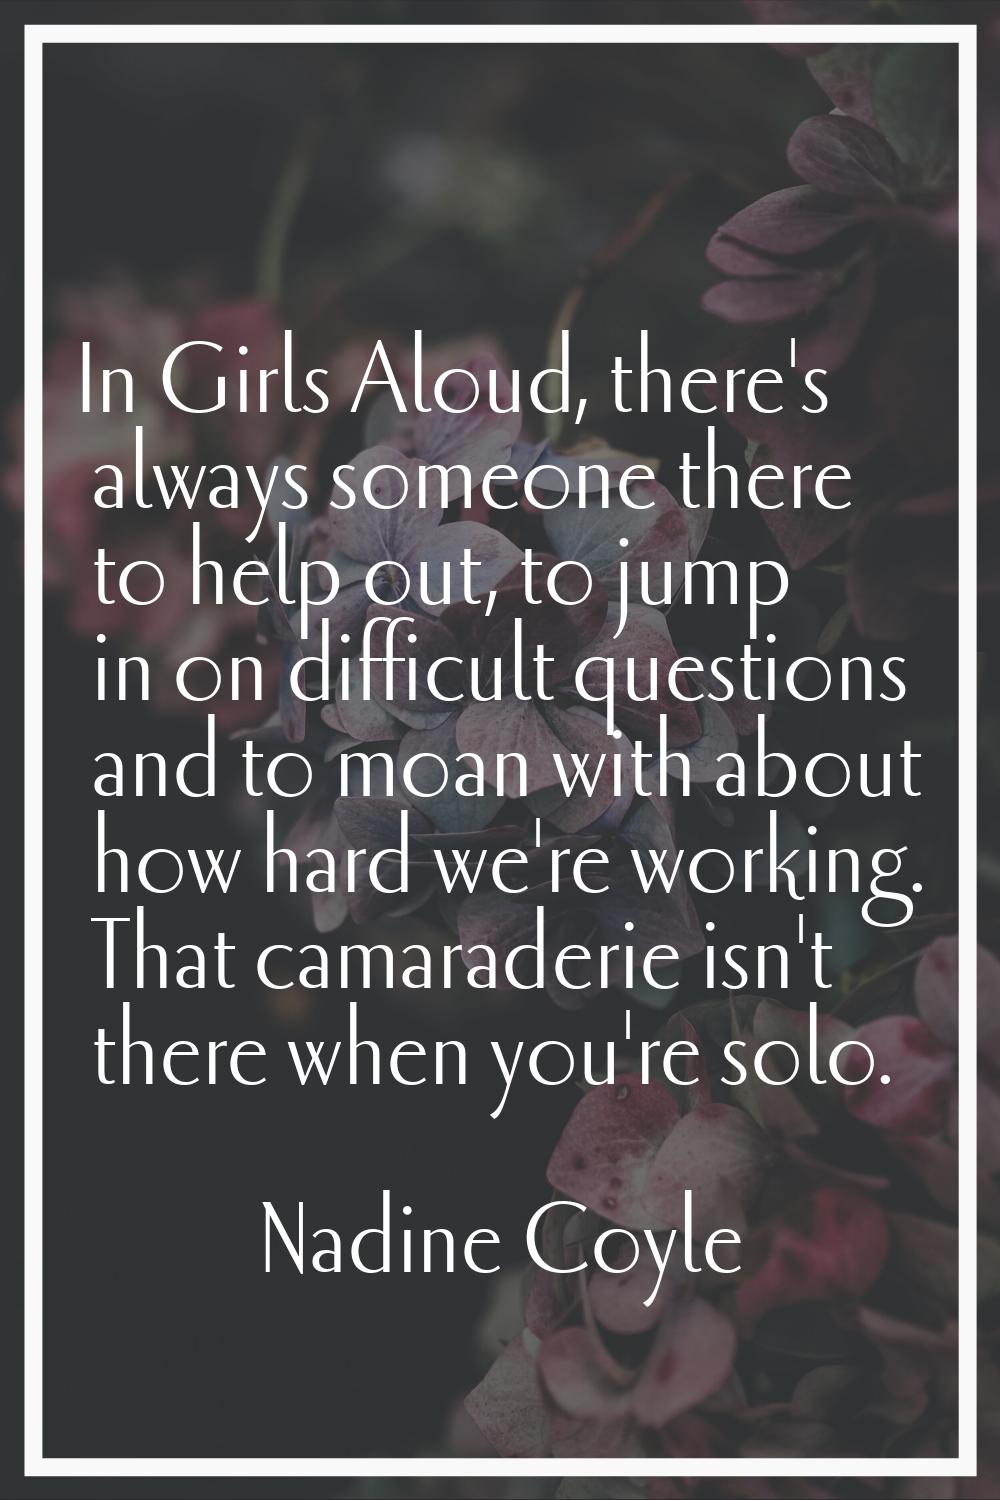 In Girls Aloud, there's always someone there to help out, to jump in on difficult questions and to 